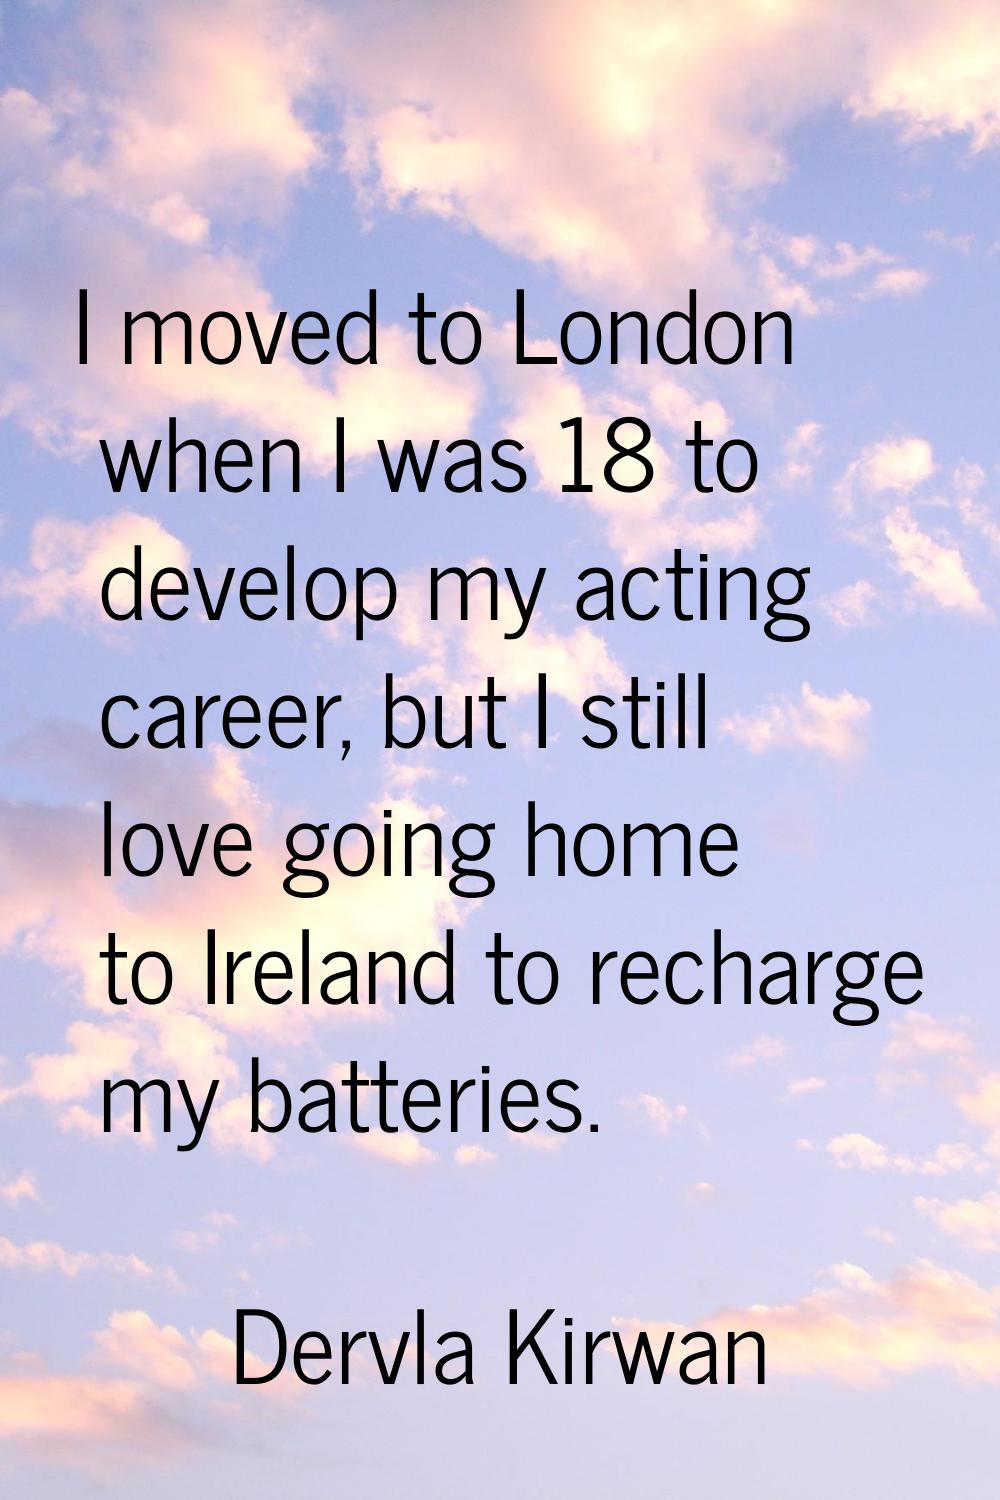 I moved to London when I was 18 to develop my acting career, but I still love going home to Ireland